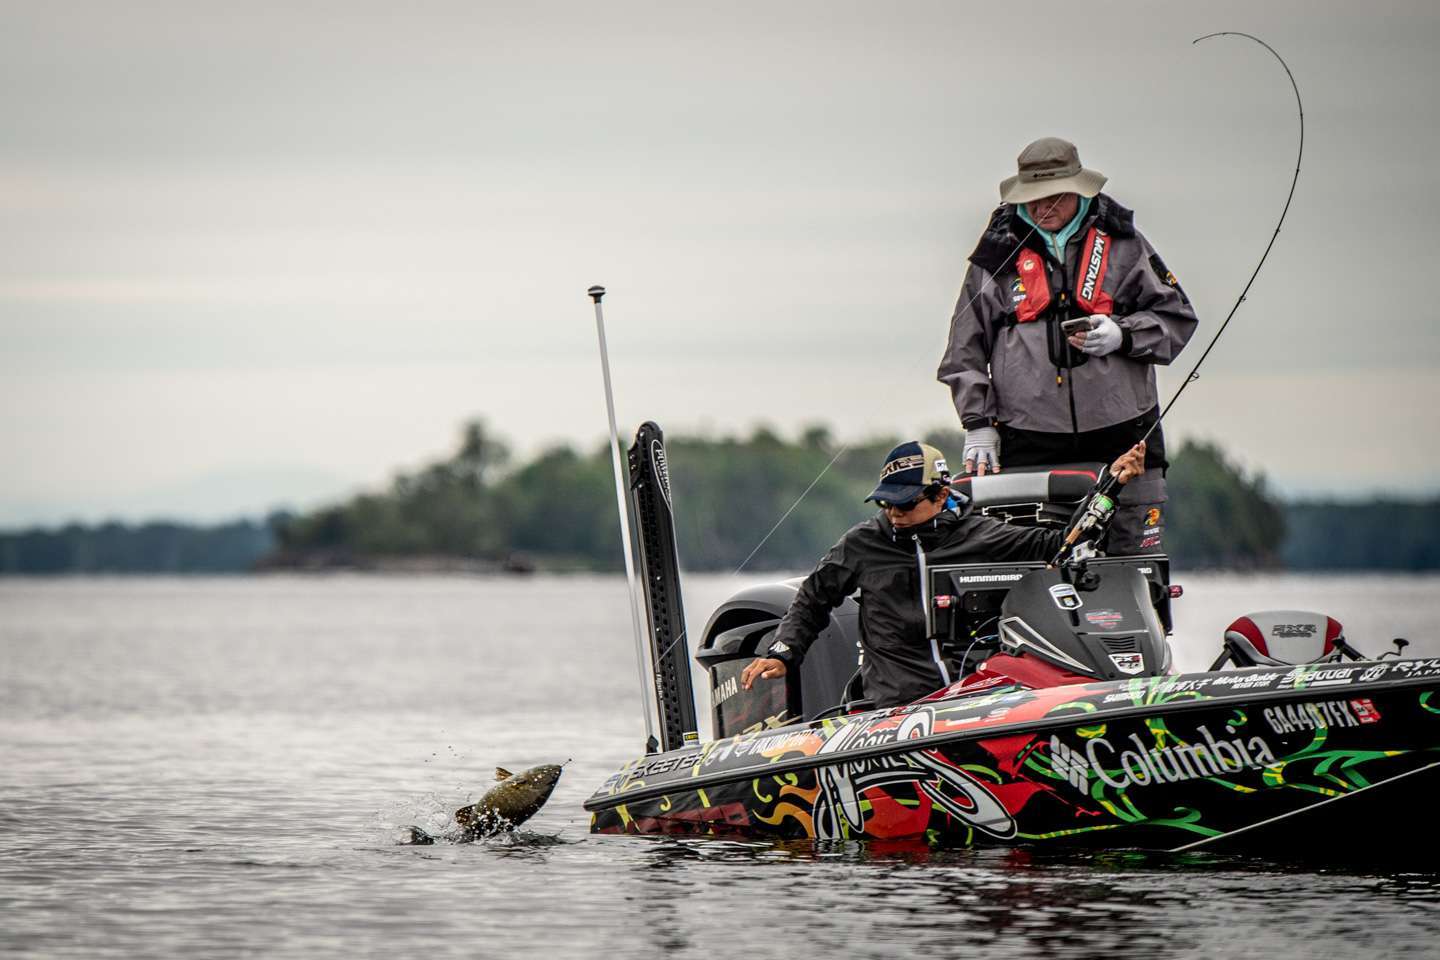 <h4>Taku Ito</h4>
Chiba, Japan<br>
Qualified via the 2021 Bassmaster Elite Series and winning the 2021 Farmers Insurance Bassmaster Elite at St. Lawrence River<br>
2021 AOY Rank: 16 (581 points)
